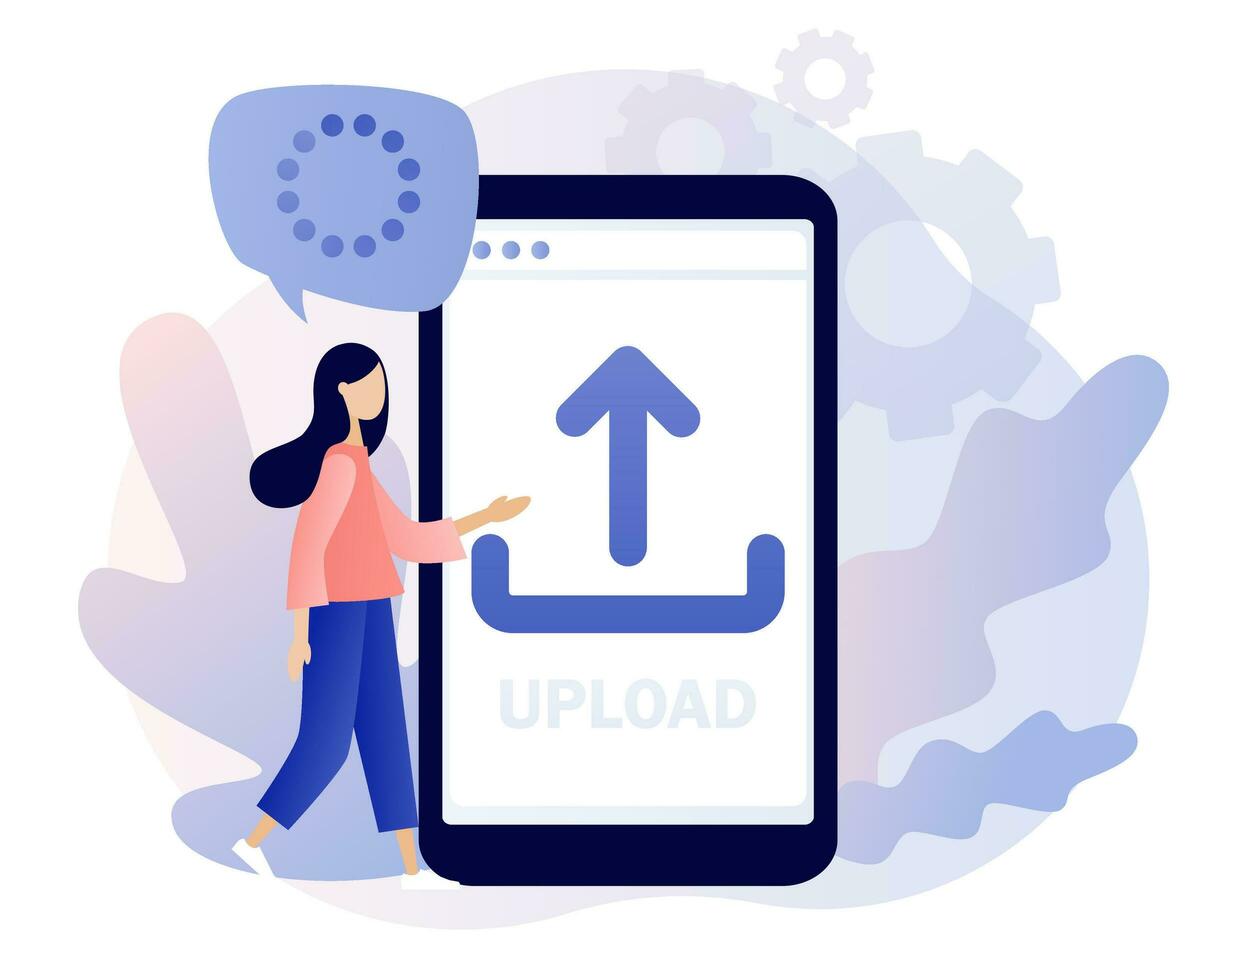 Upload symbol. Load sign. Tiny woman uploading data, files from smartphone. Data exchange concept. Modern flat cartoon style. Vector illustration on white background